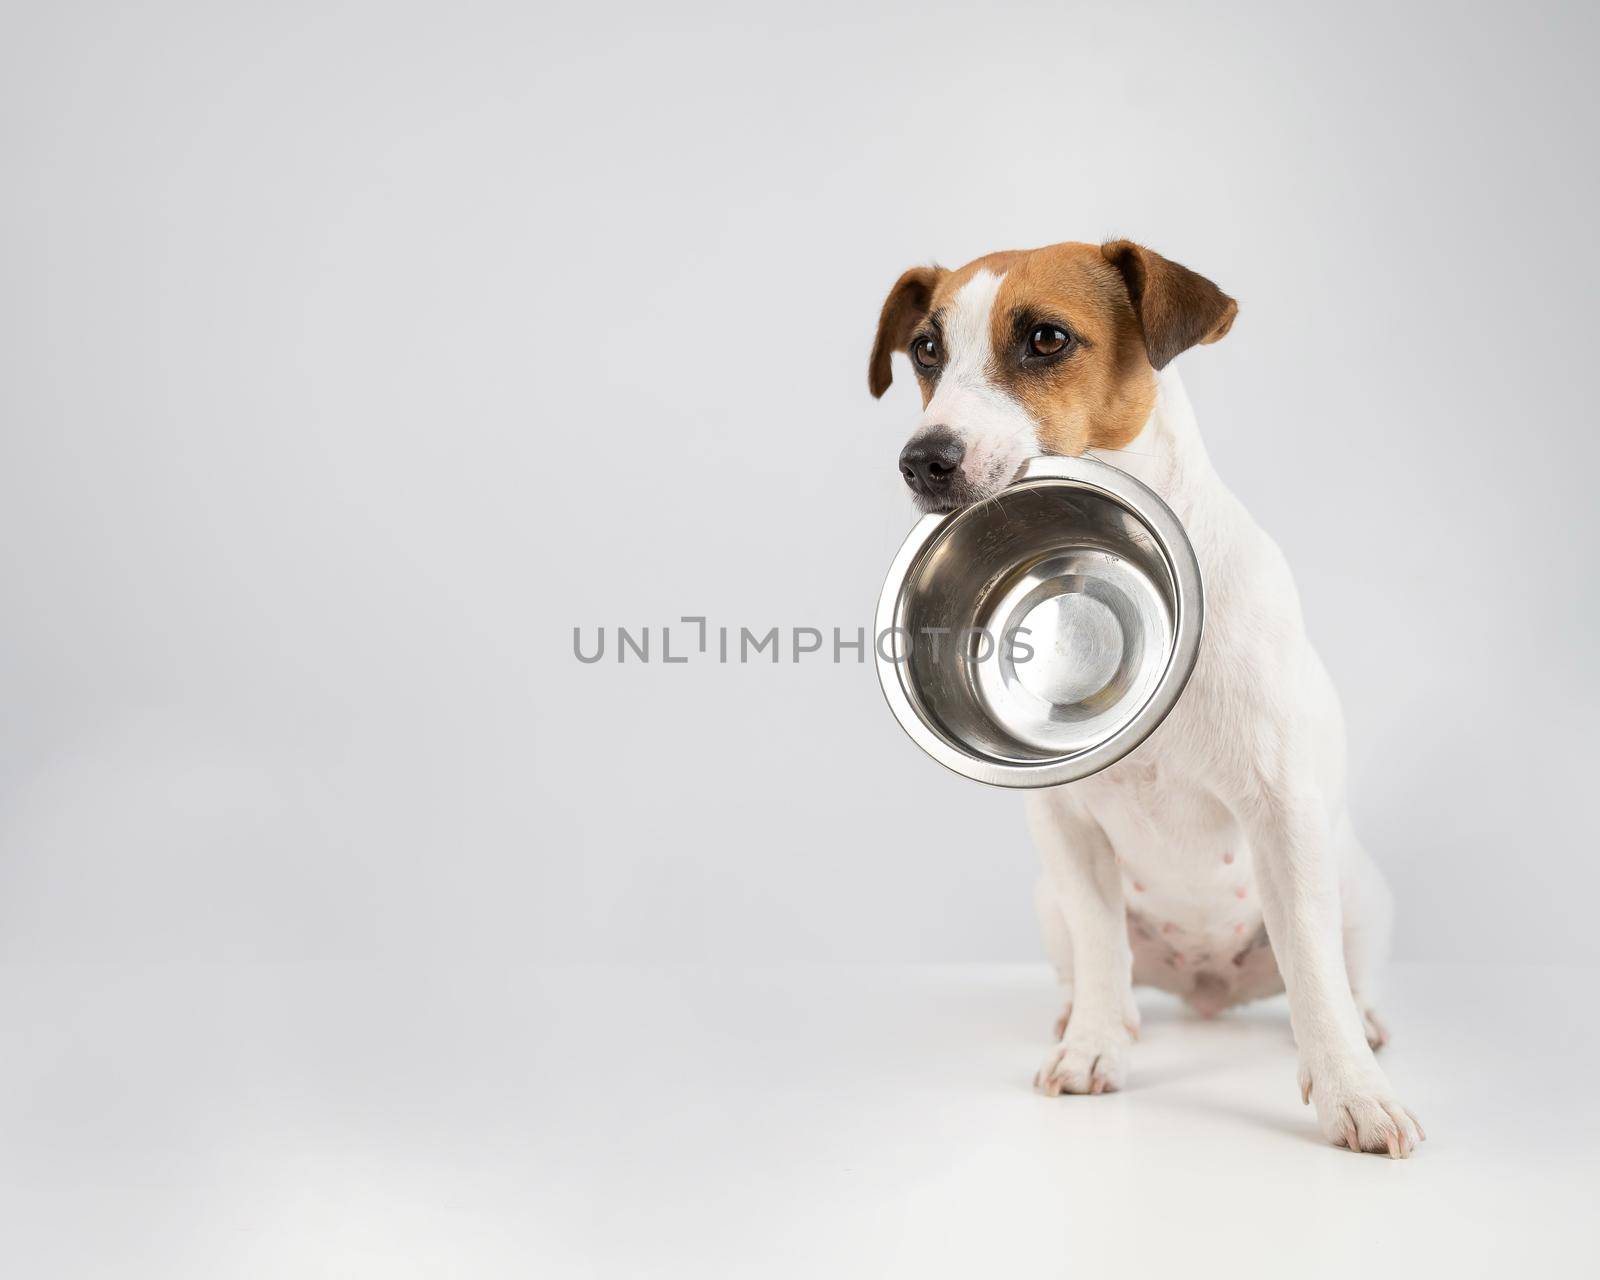 Hungry jack russell terrier holding an empty bowl on a white background. The dog asks for food